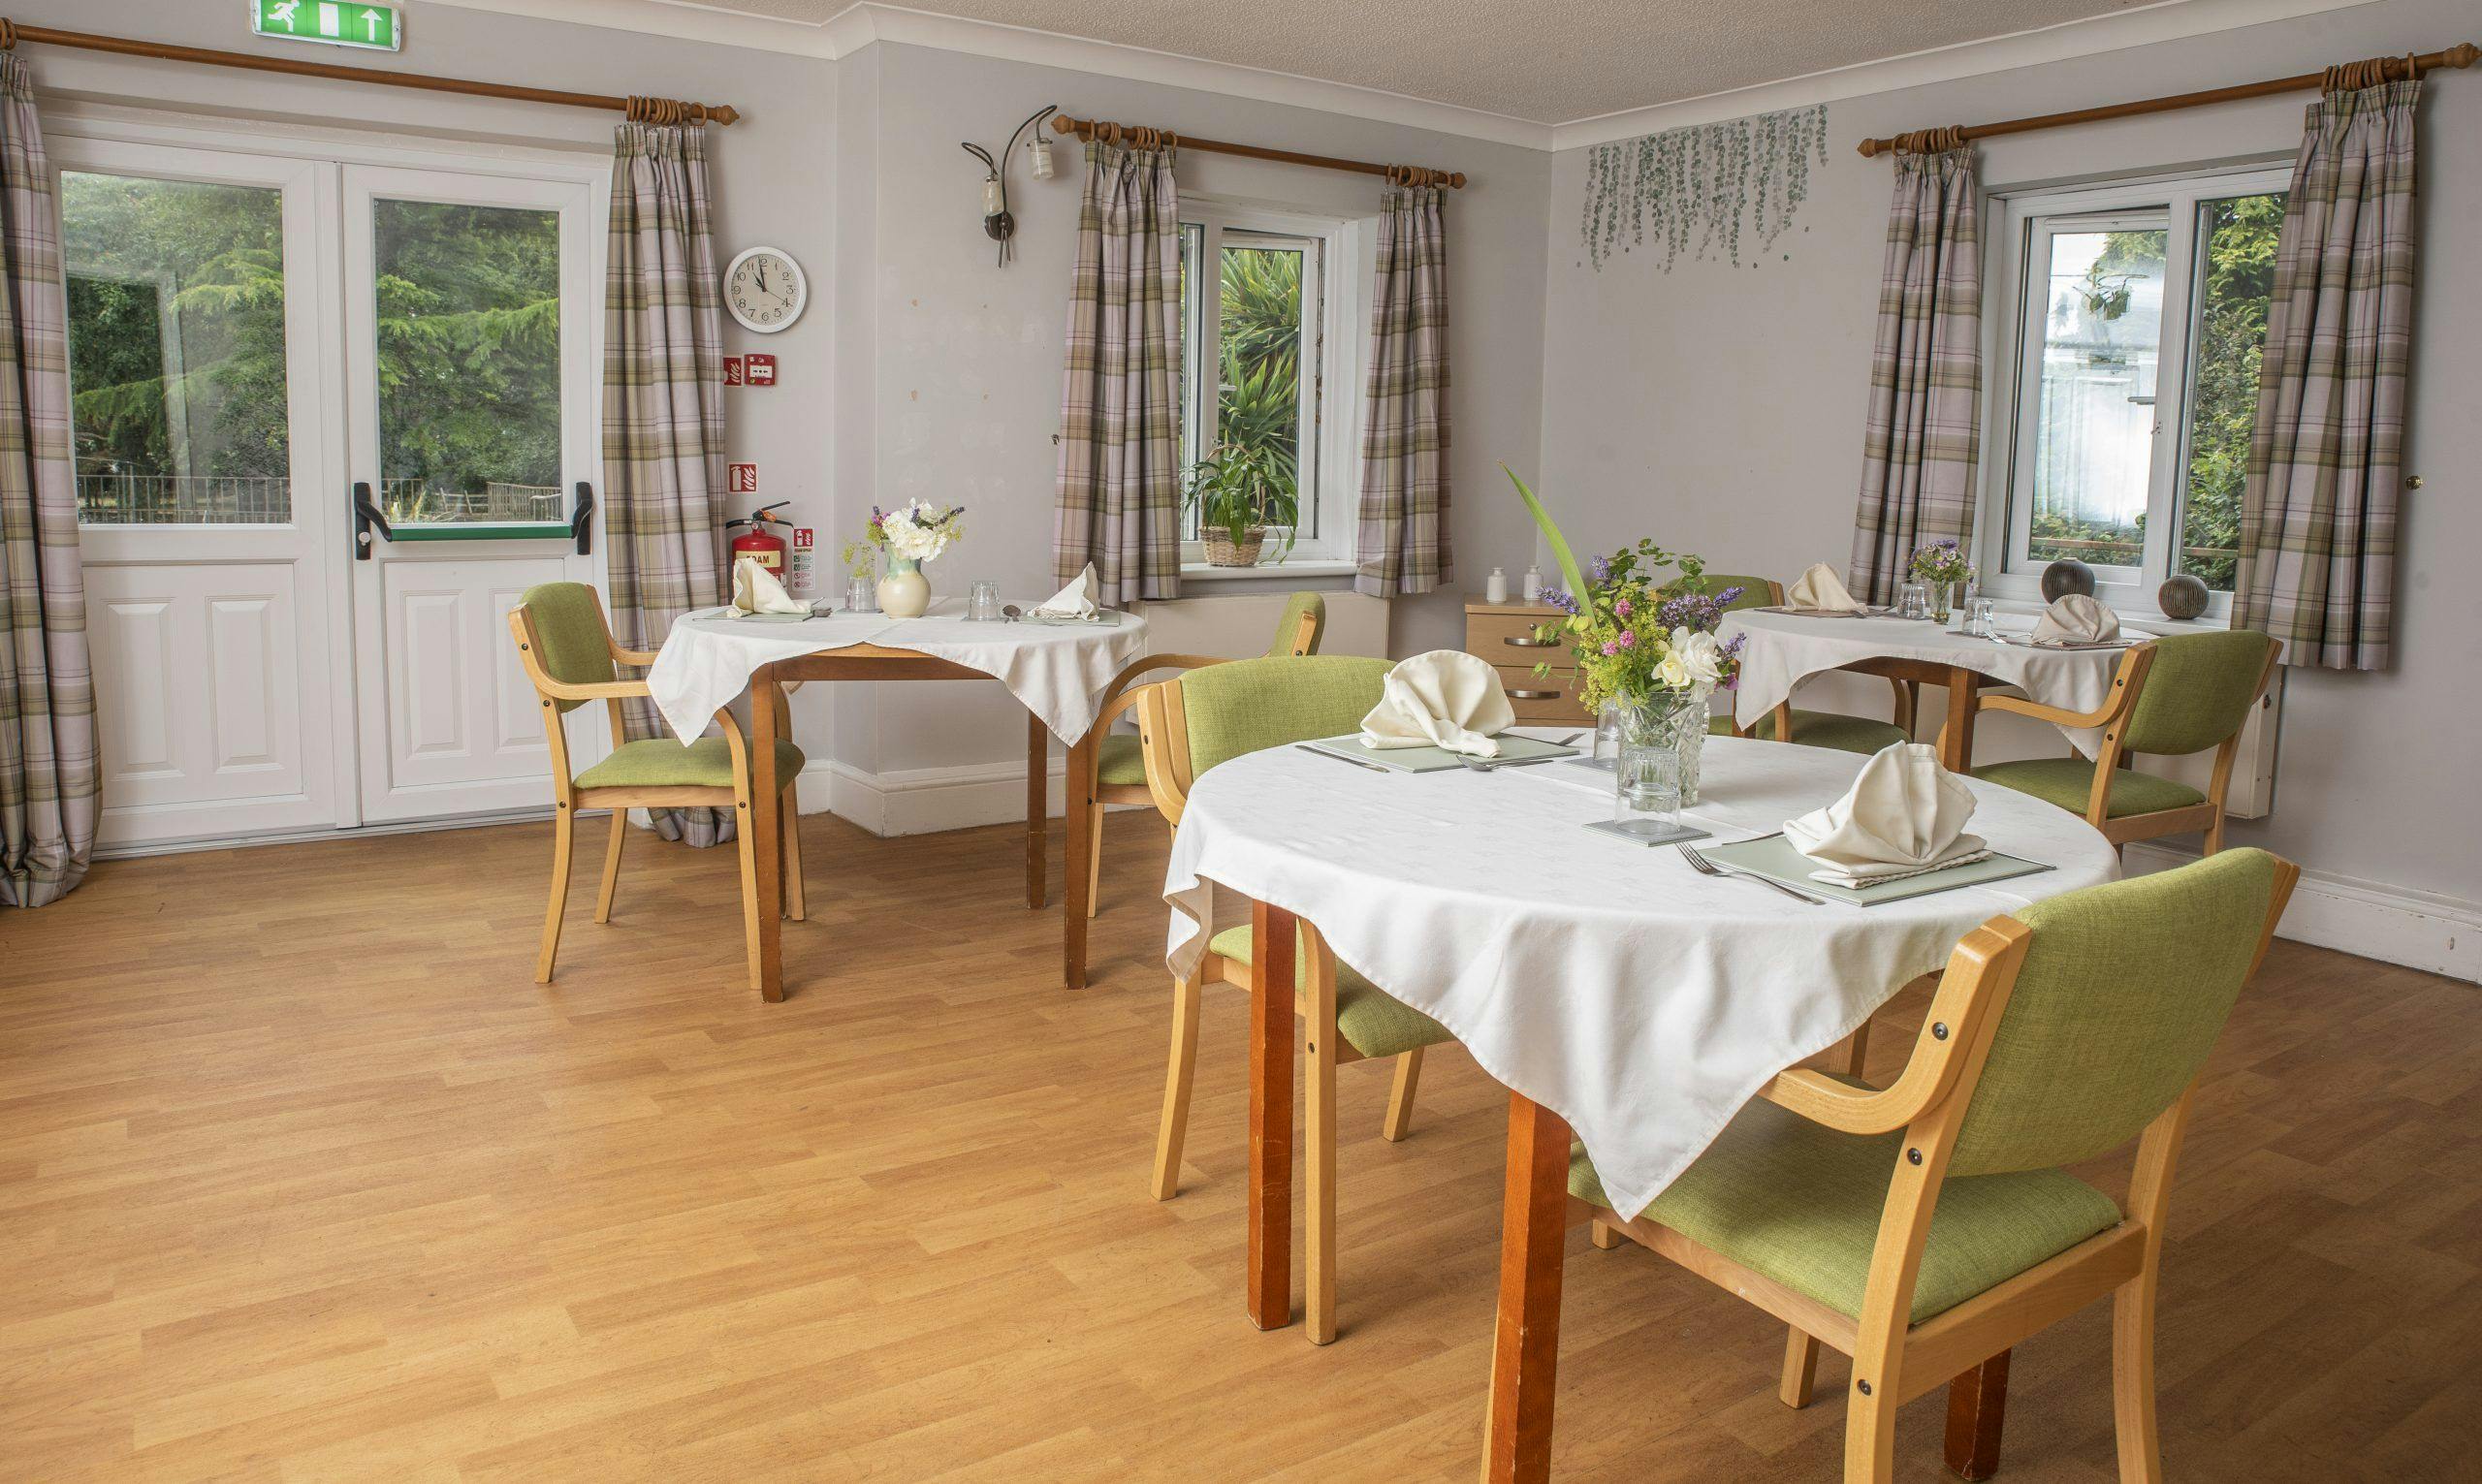 Independent Care Home - The Glen care home 7